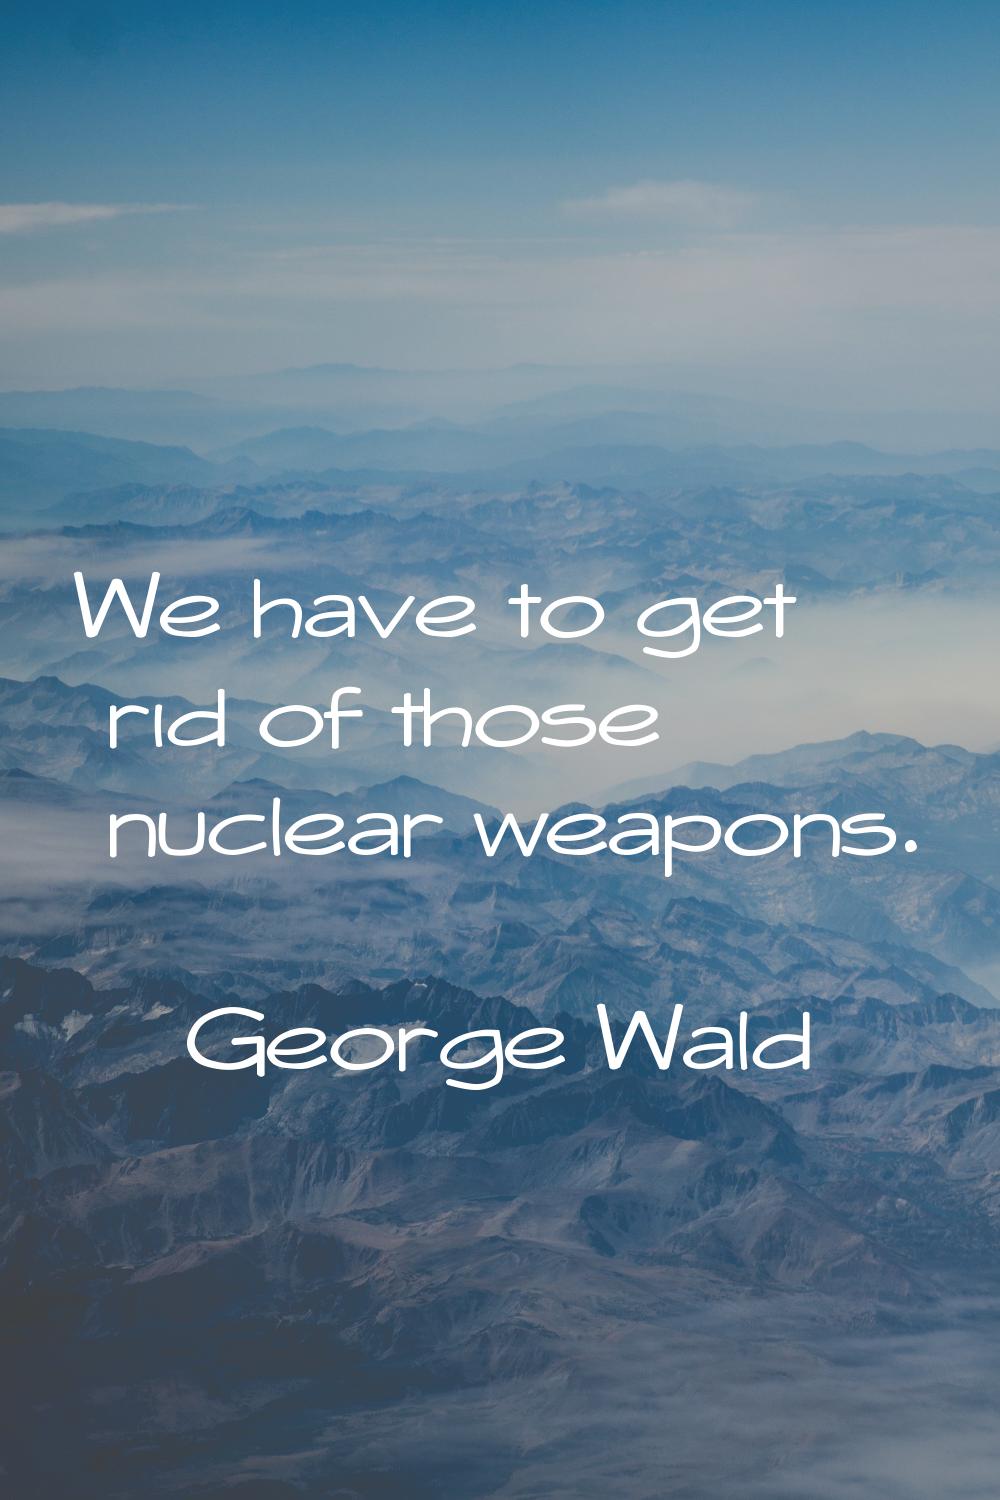 We have to get rid of those nuclear weapons.